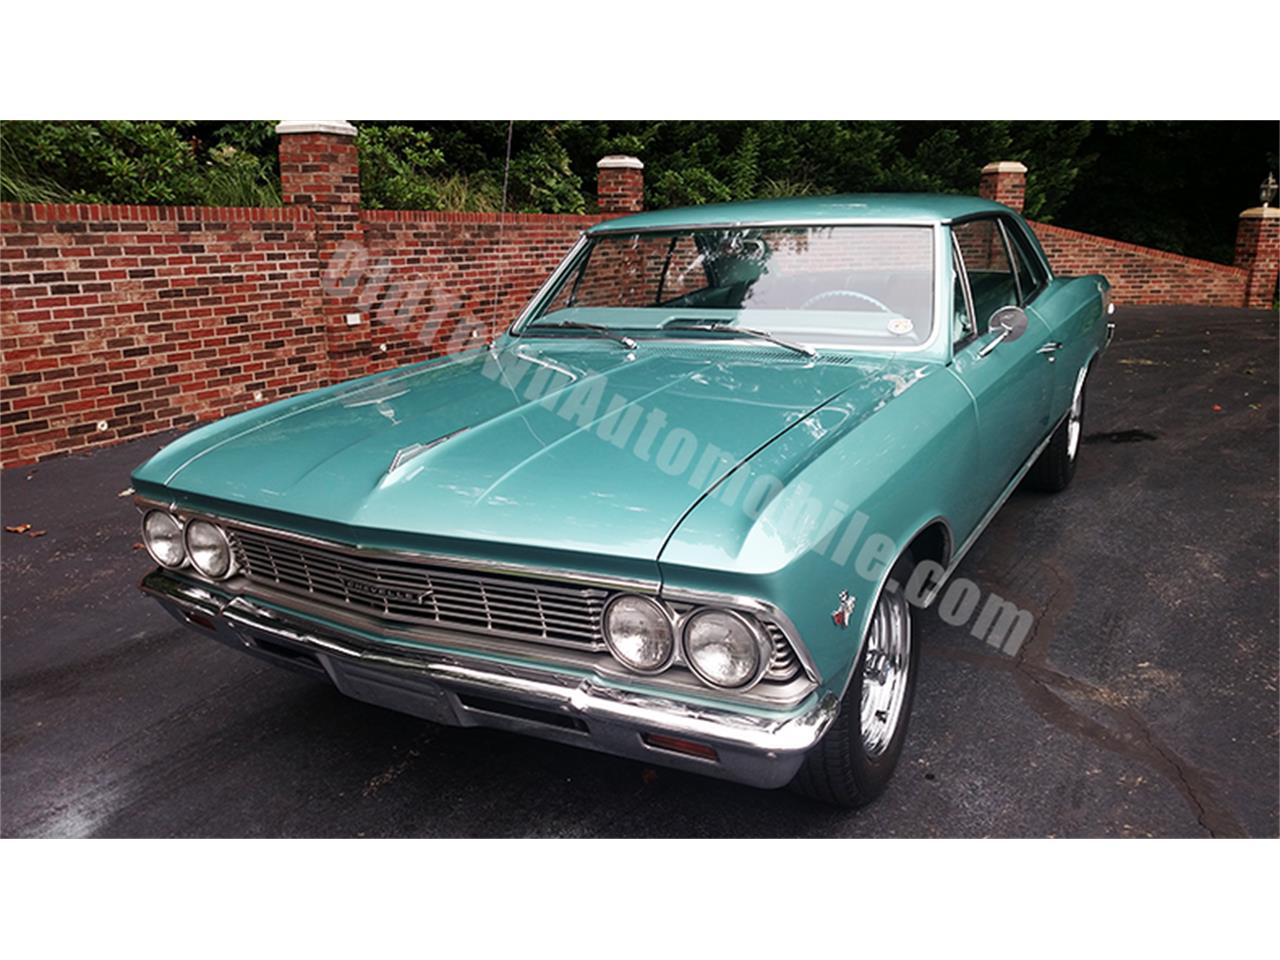 1966 Chevrolet Chevelle for sale in Huntingtown, MD